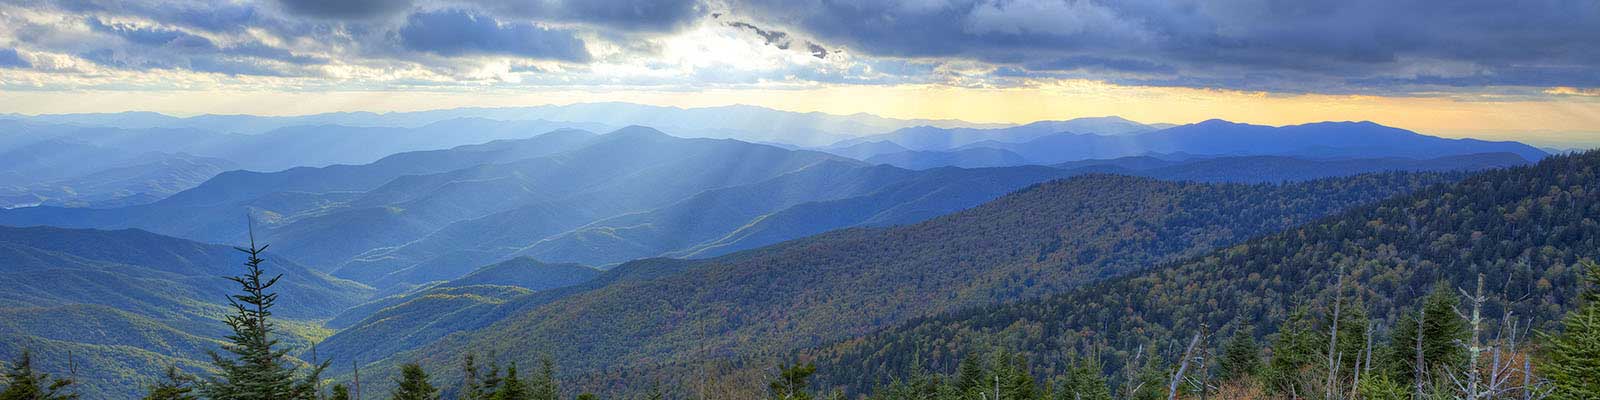 Great Smoky Mountains National Park Backpacking Permits